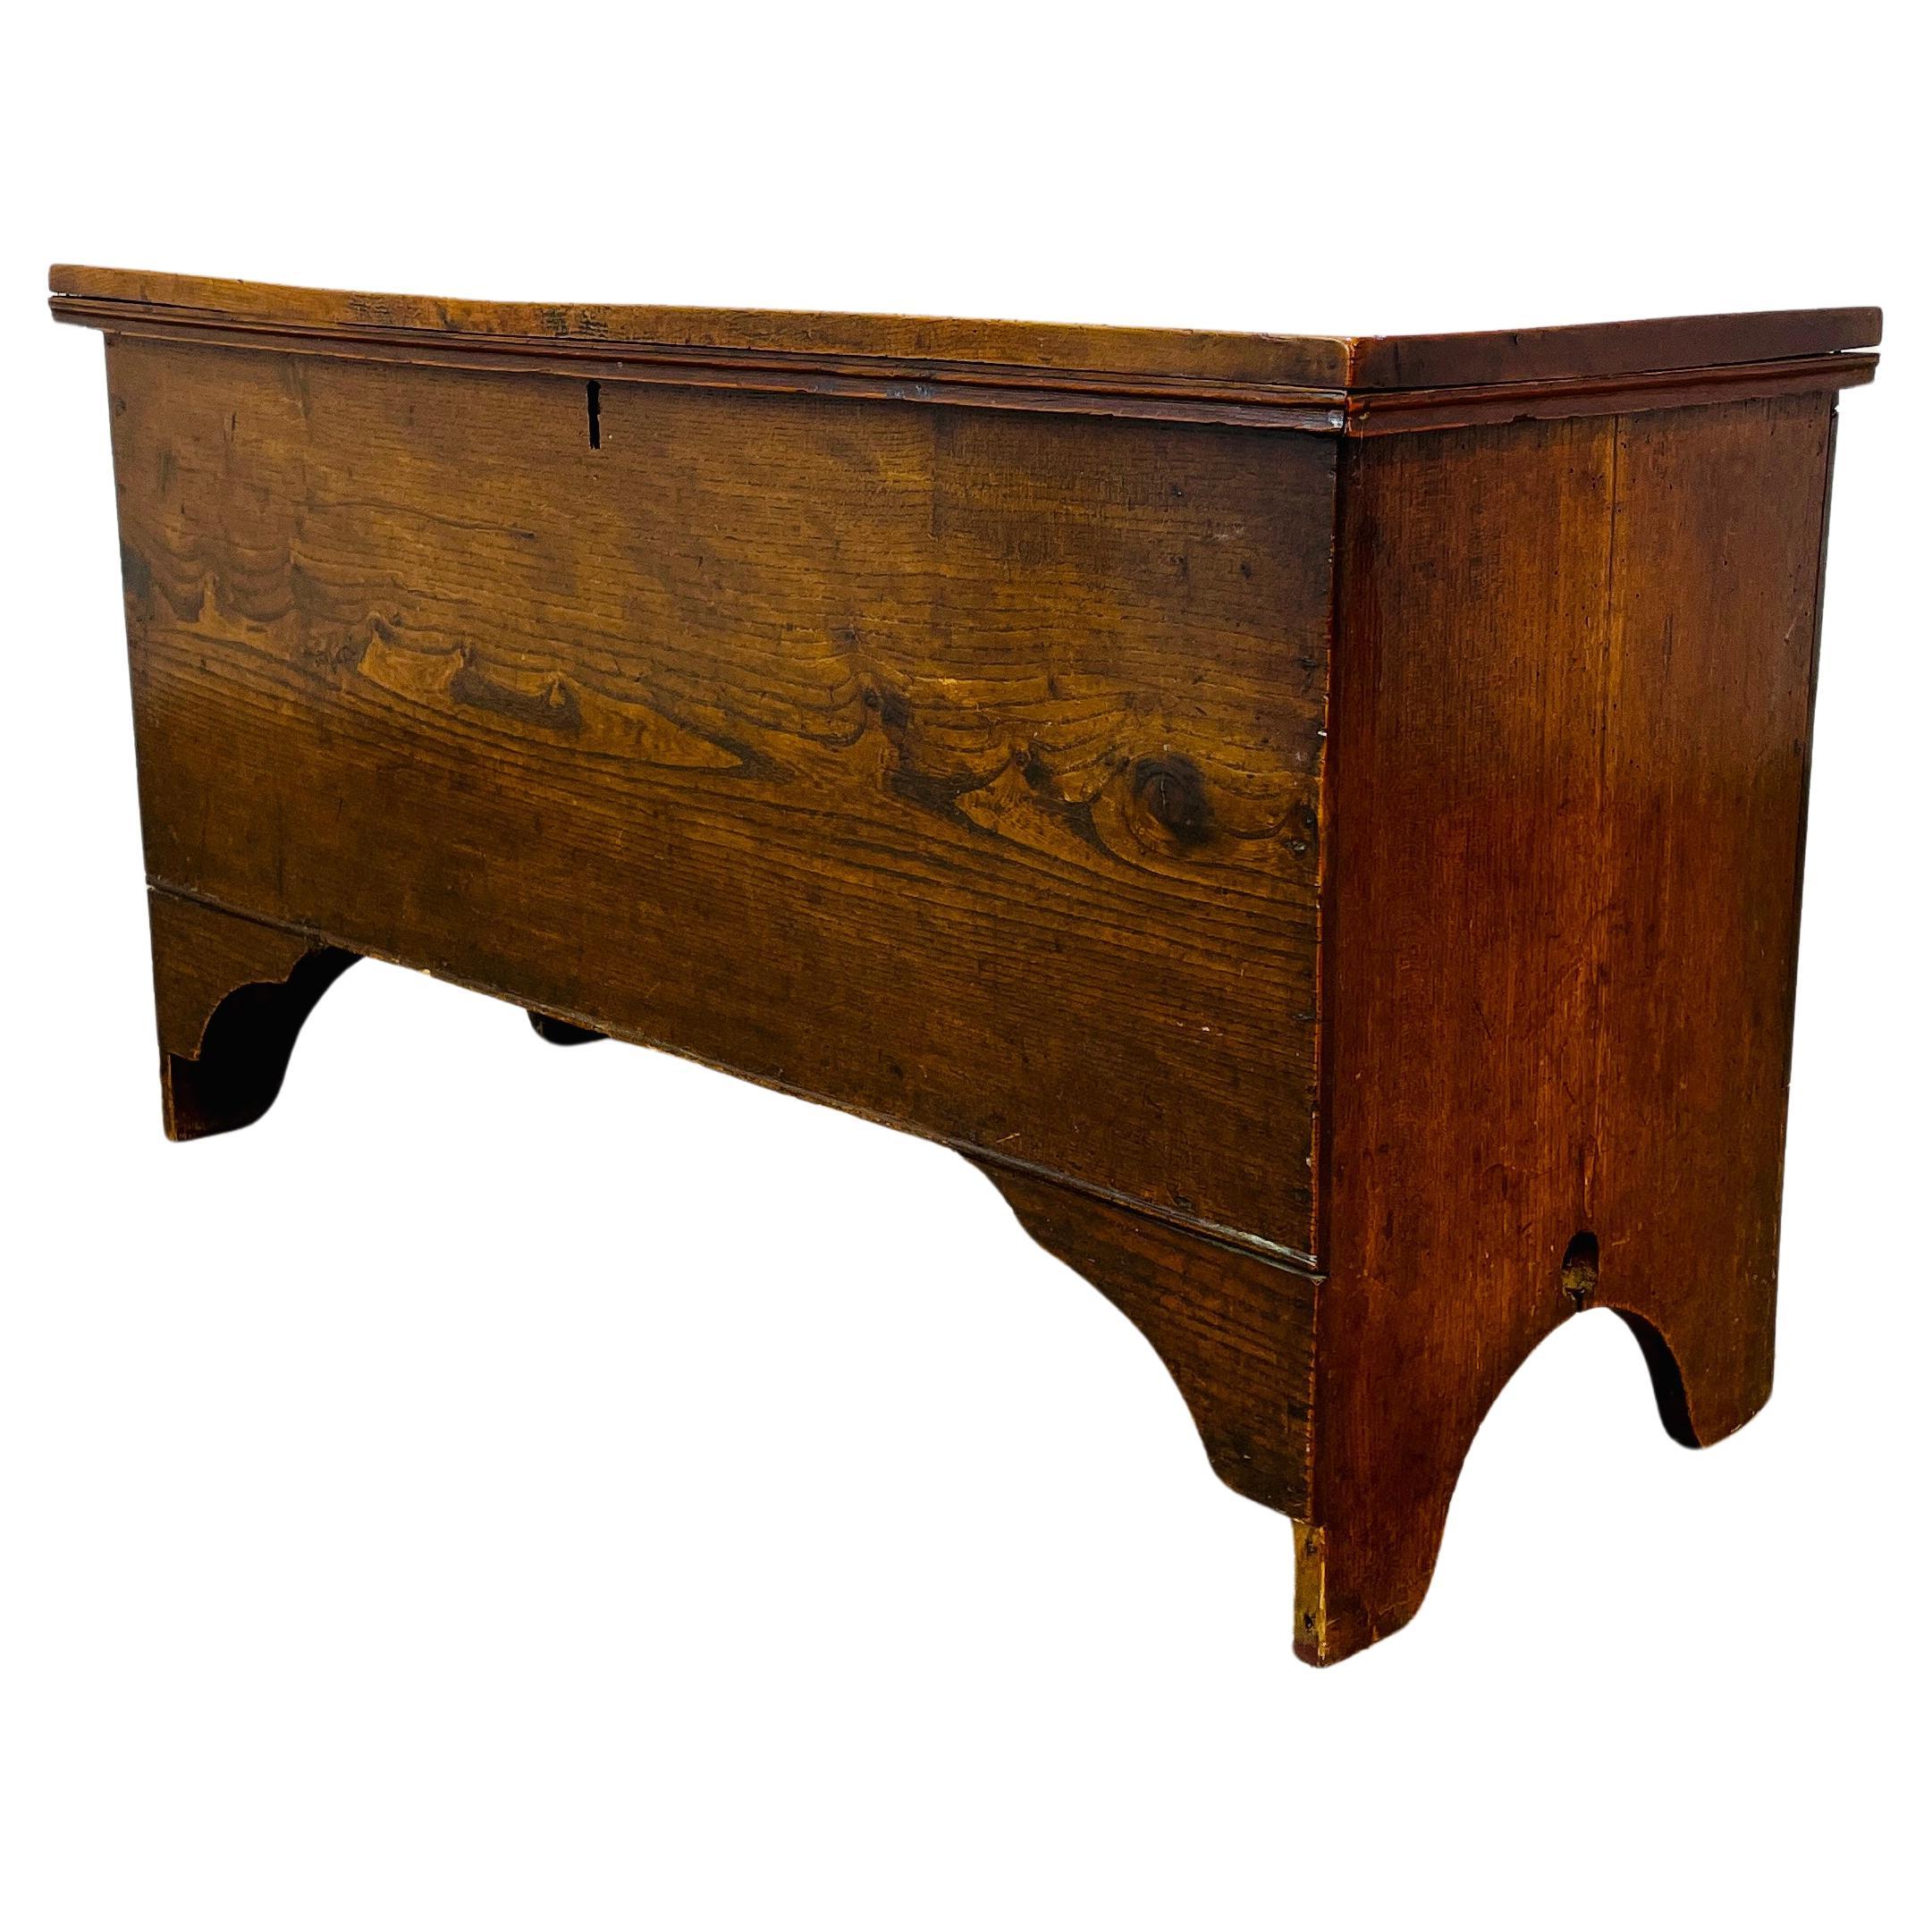 Antique English Georgian Coffer / Trunk, early 19th Century For Sale